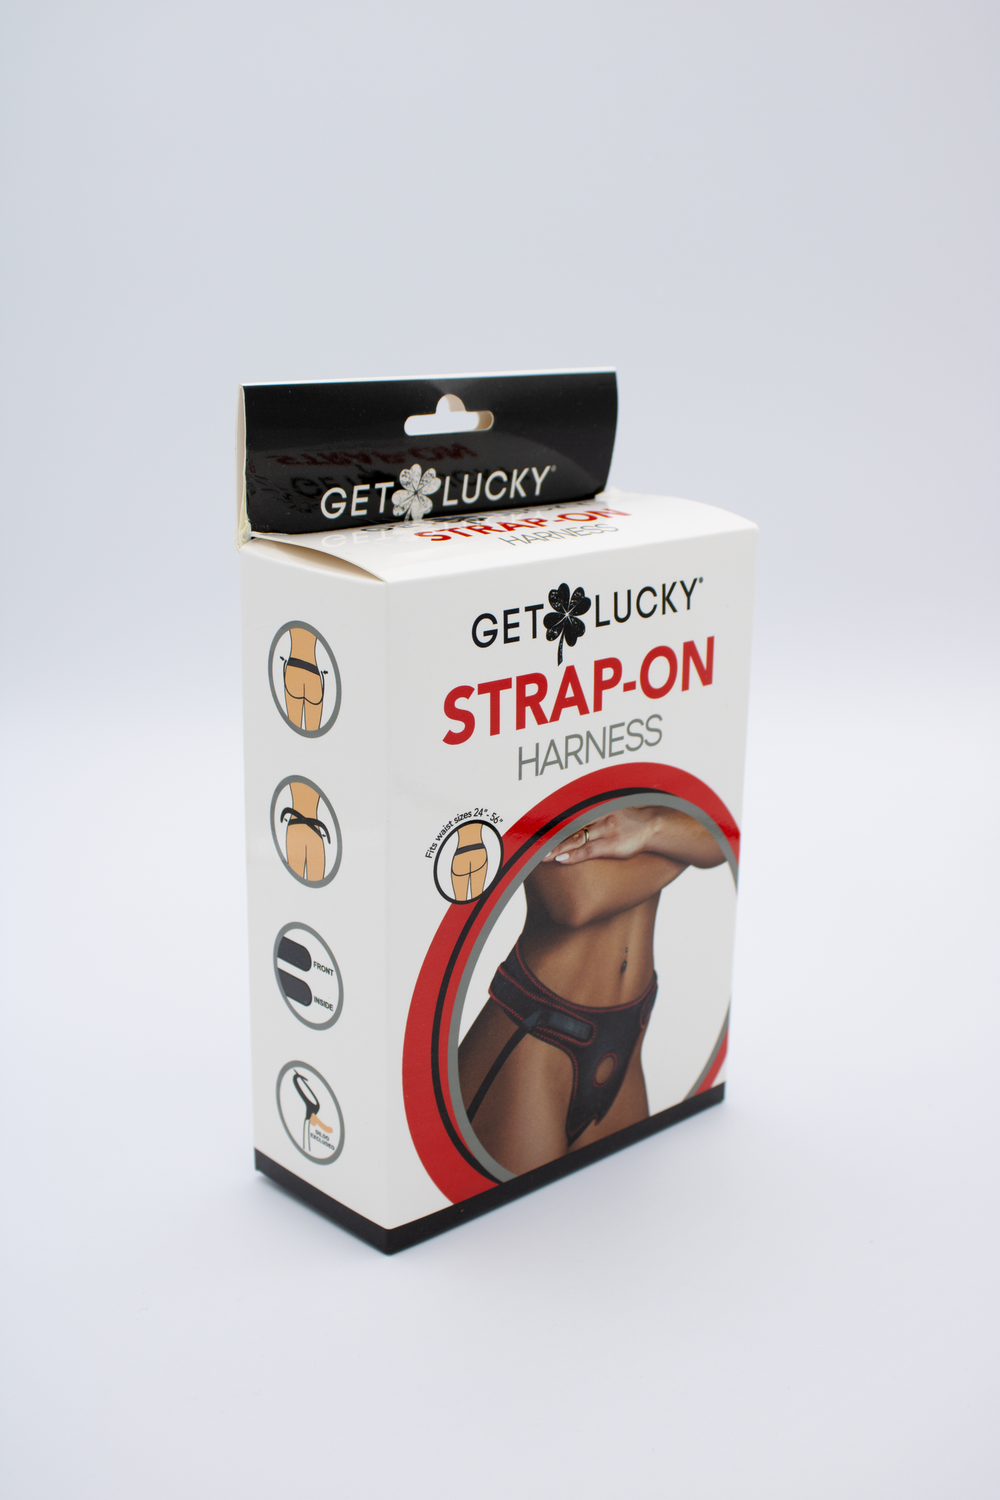 Get Lucky Strap-On Harness